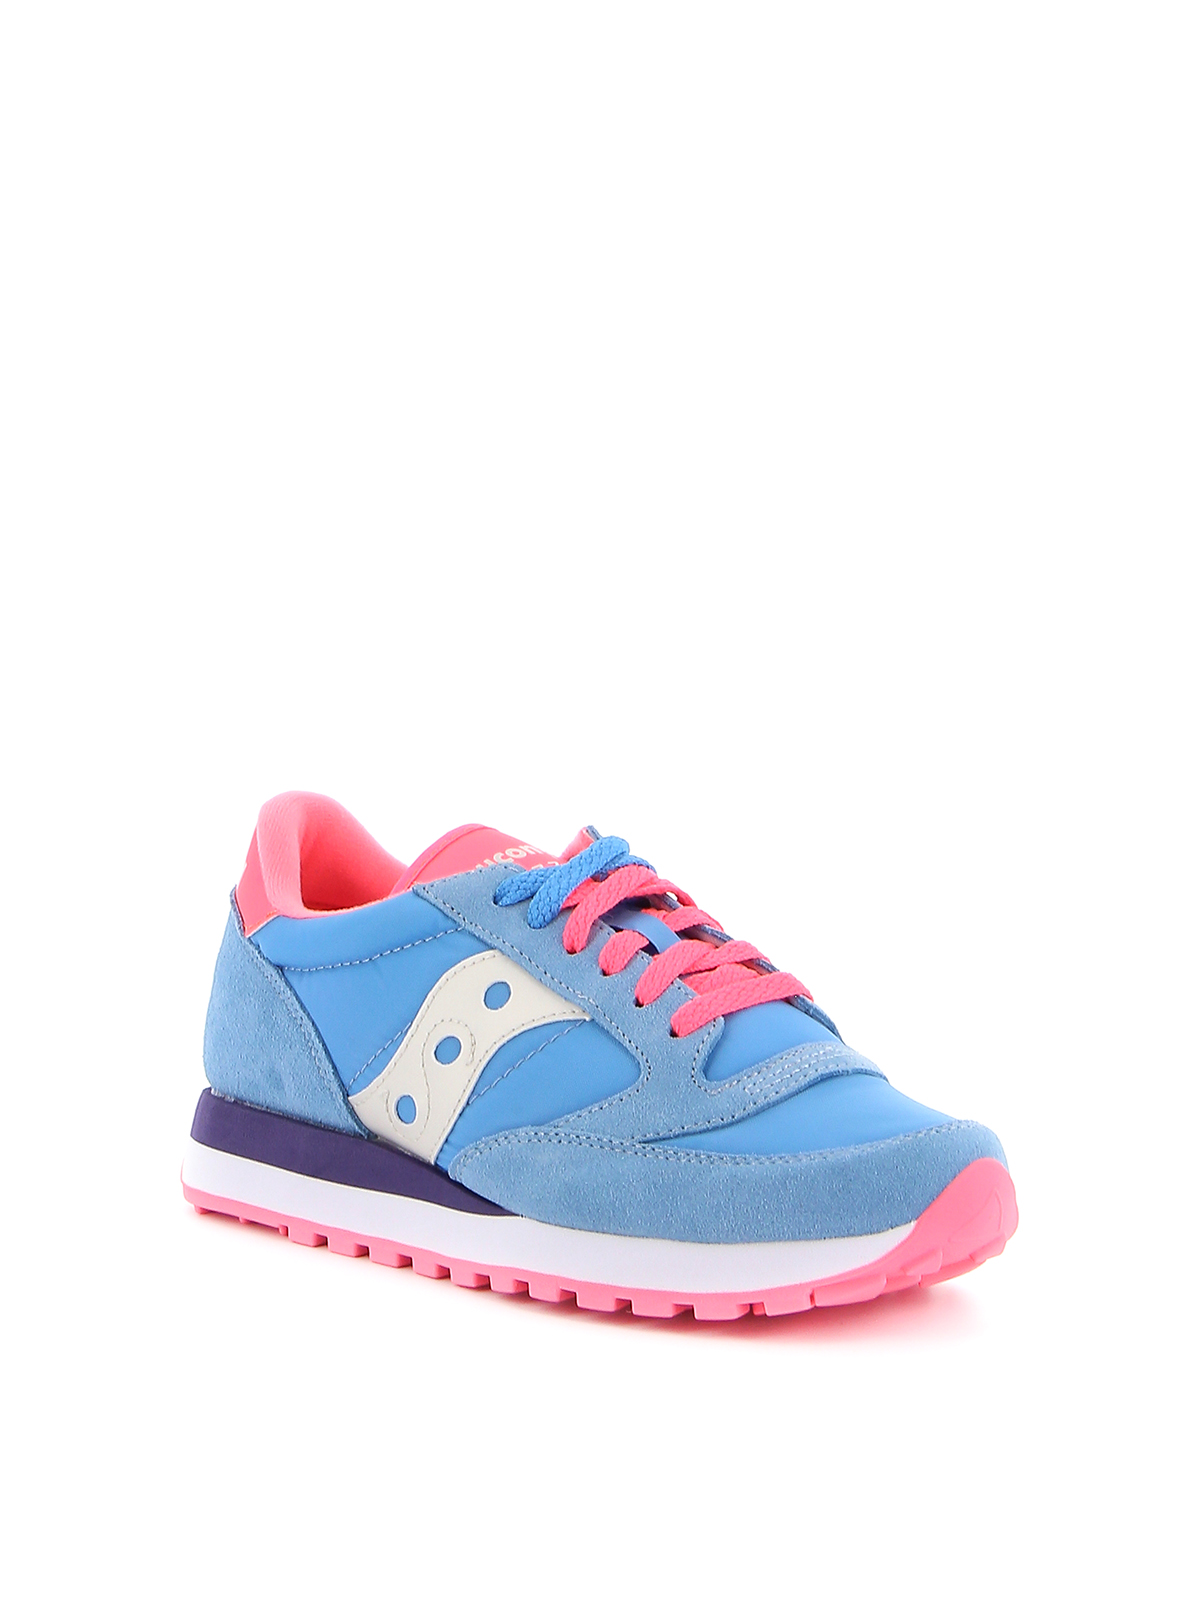 blue pink trainers